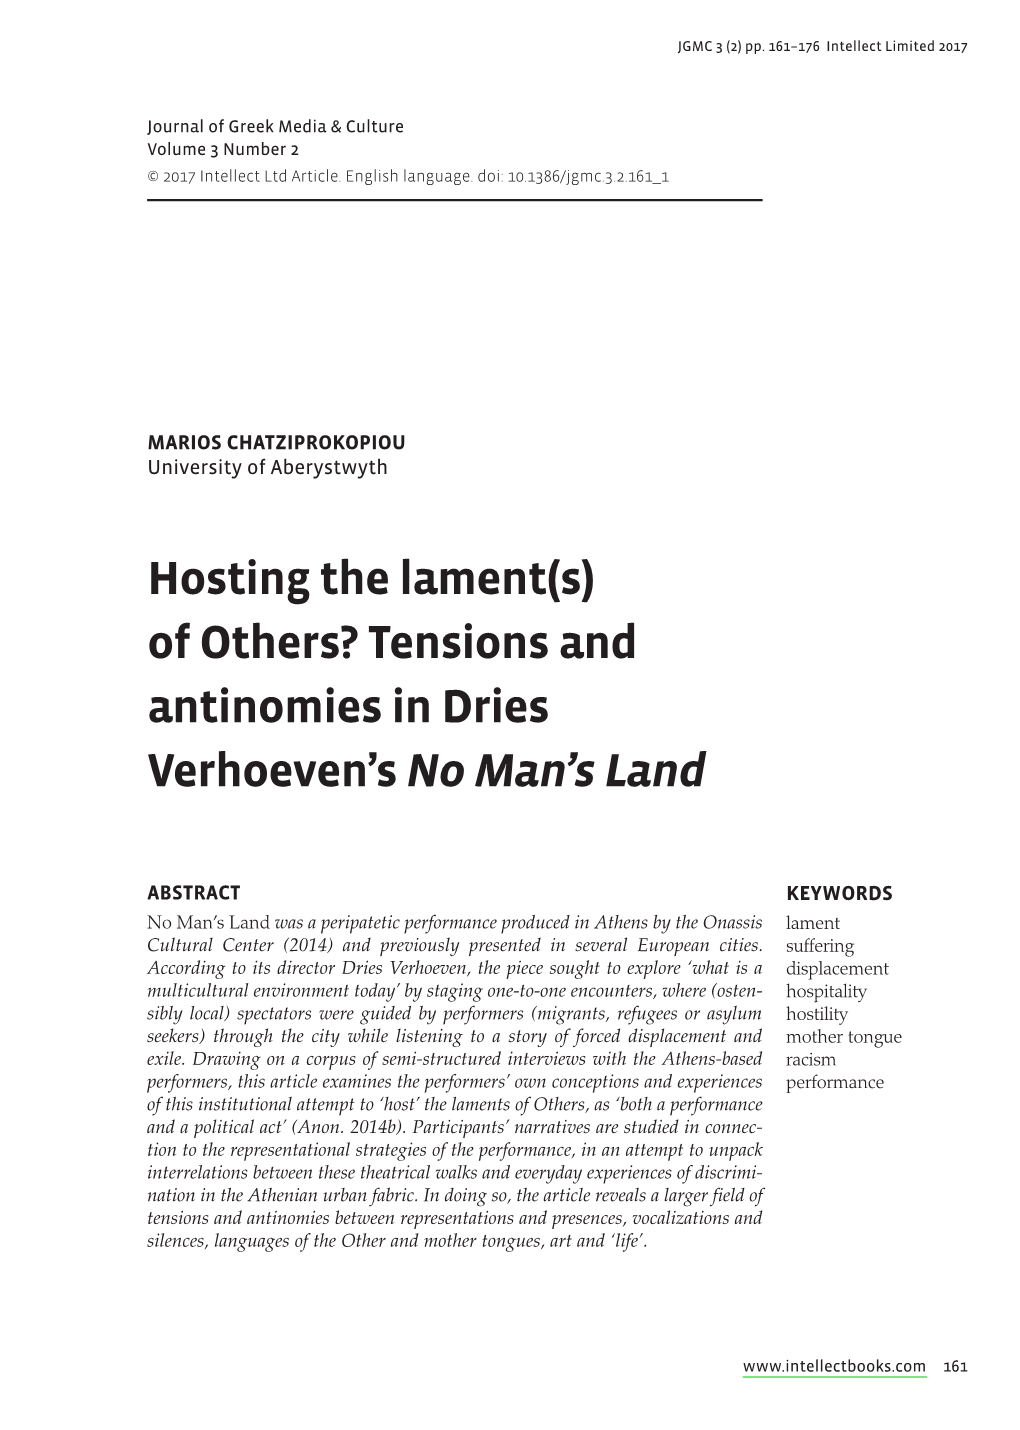 Hosting the Lament(S) of Others? Tensions and Antinomies in Dries Verhoevenâ•Žs &lt;I&gt;No Manâ•Žs Land&lt;/I&gt;